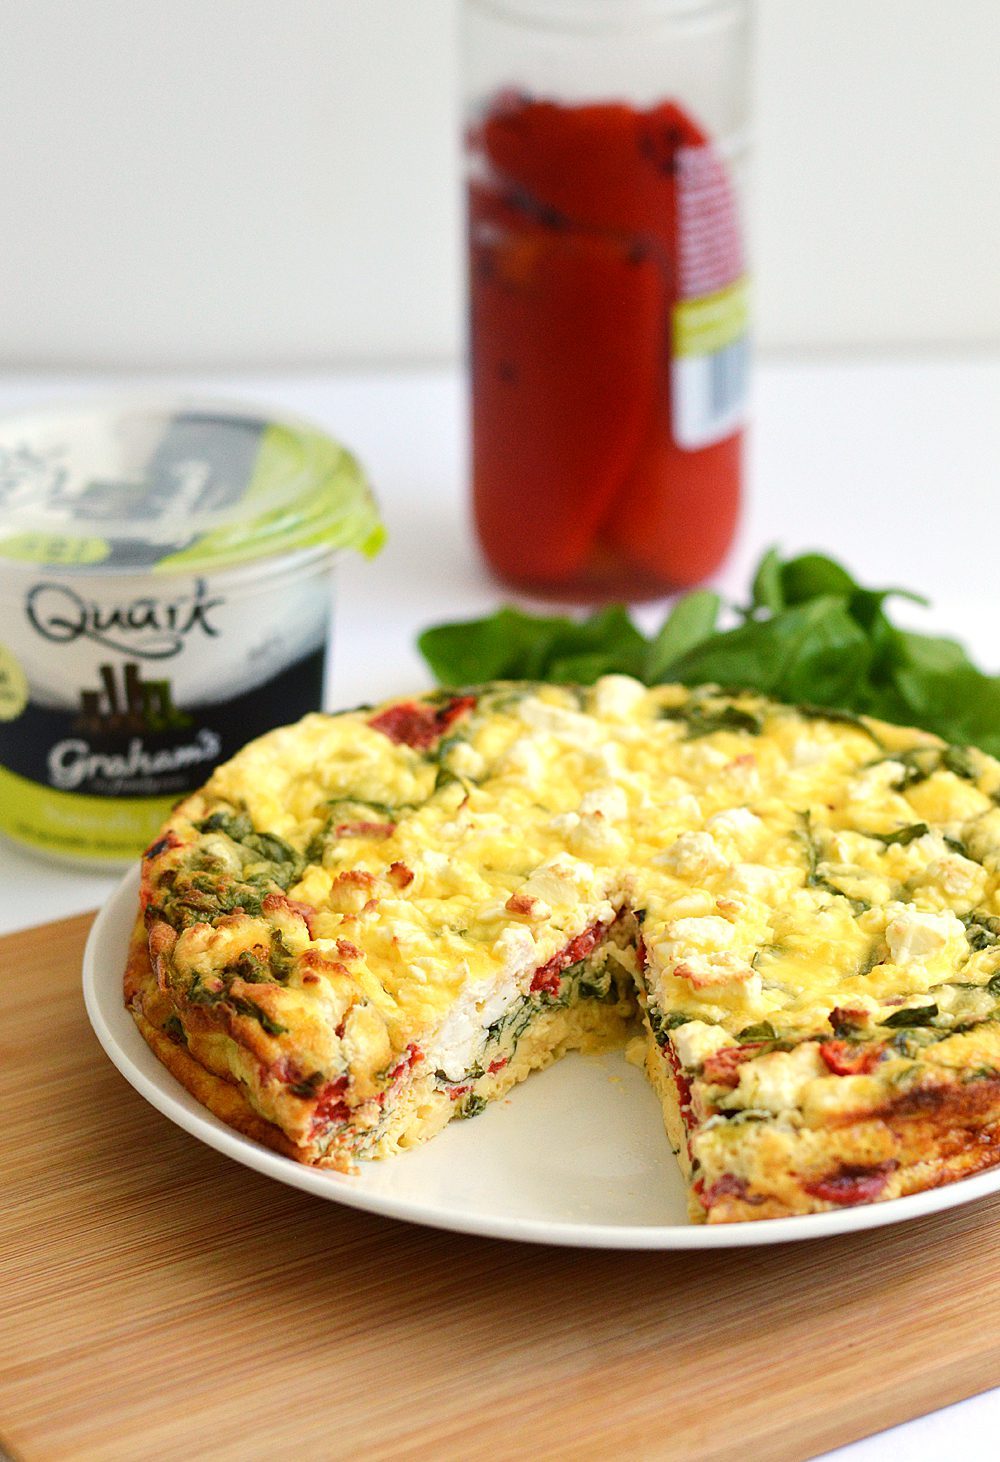 Roasted red pepper feta and spinach crustless quiche